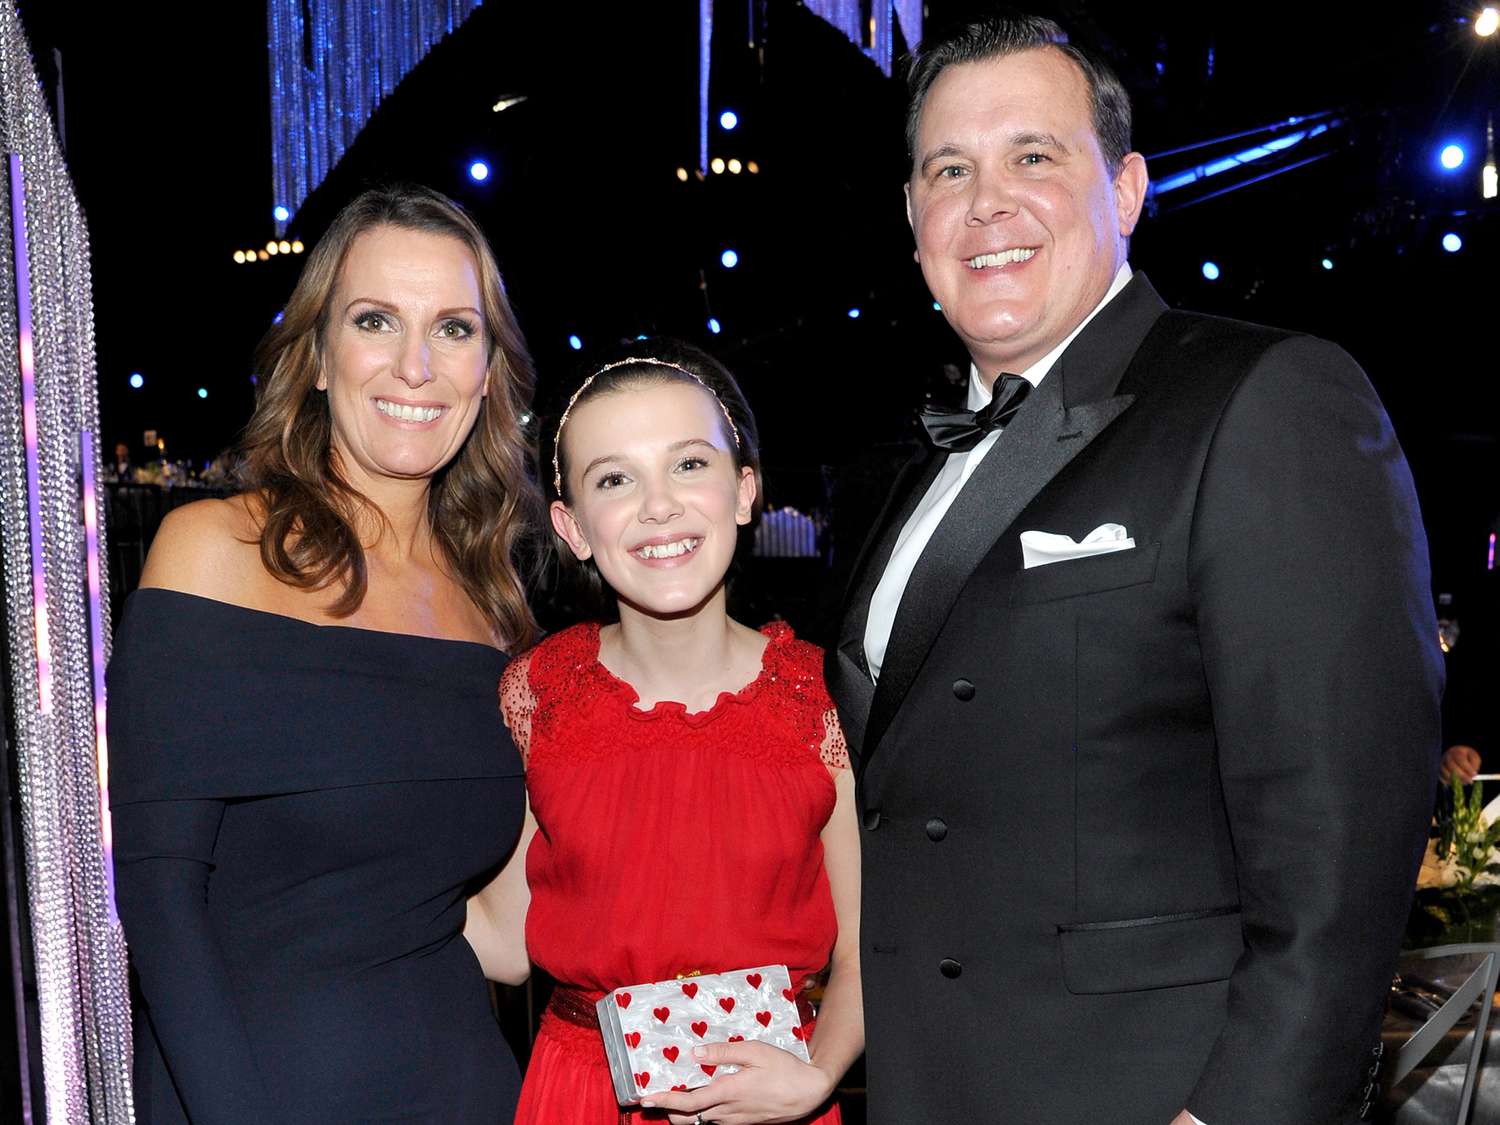 Millie Bobby Brown and her parents, Robert and Kelly, at The 23rd Annual Screen Actors Guild Awards Cocktail Reception.